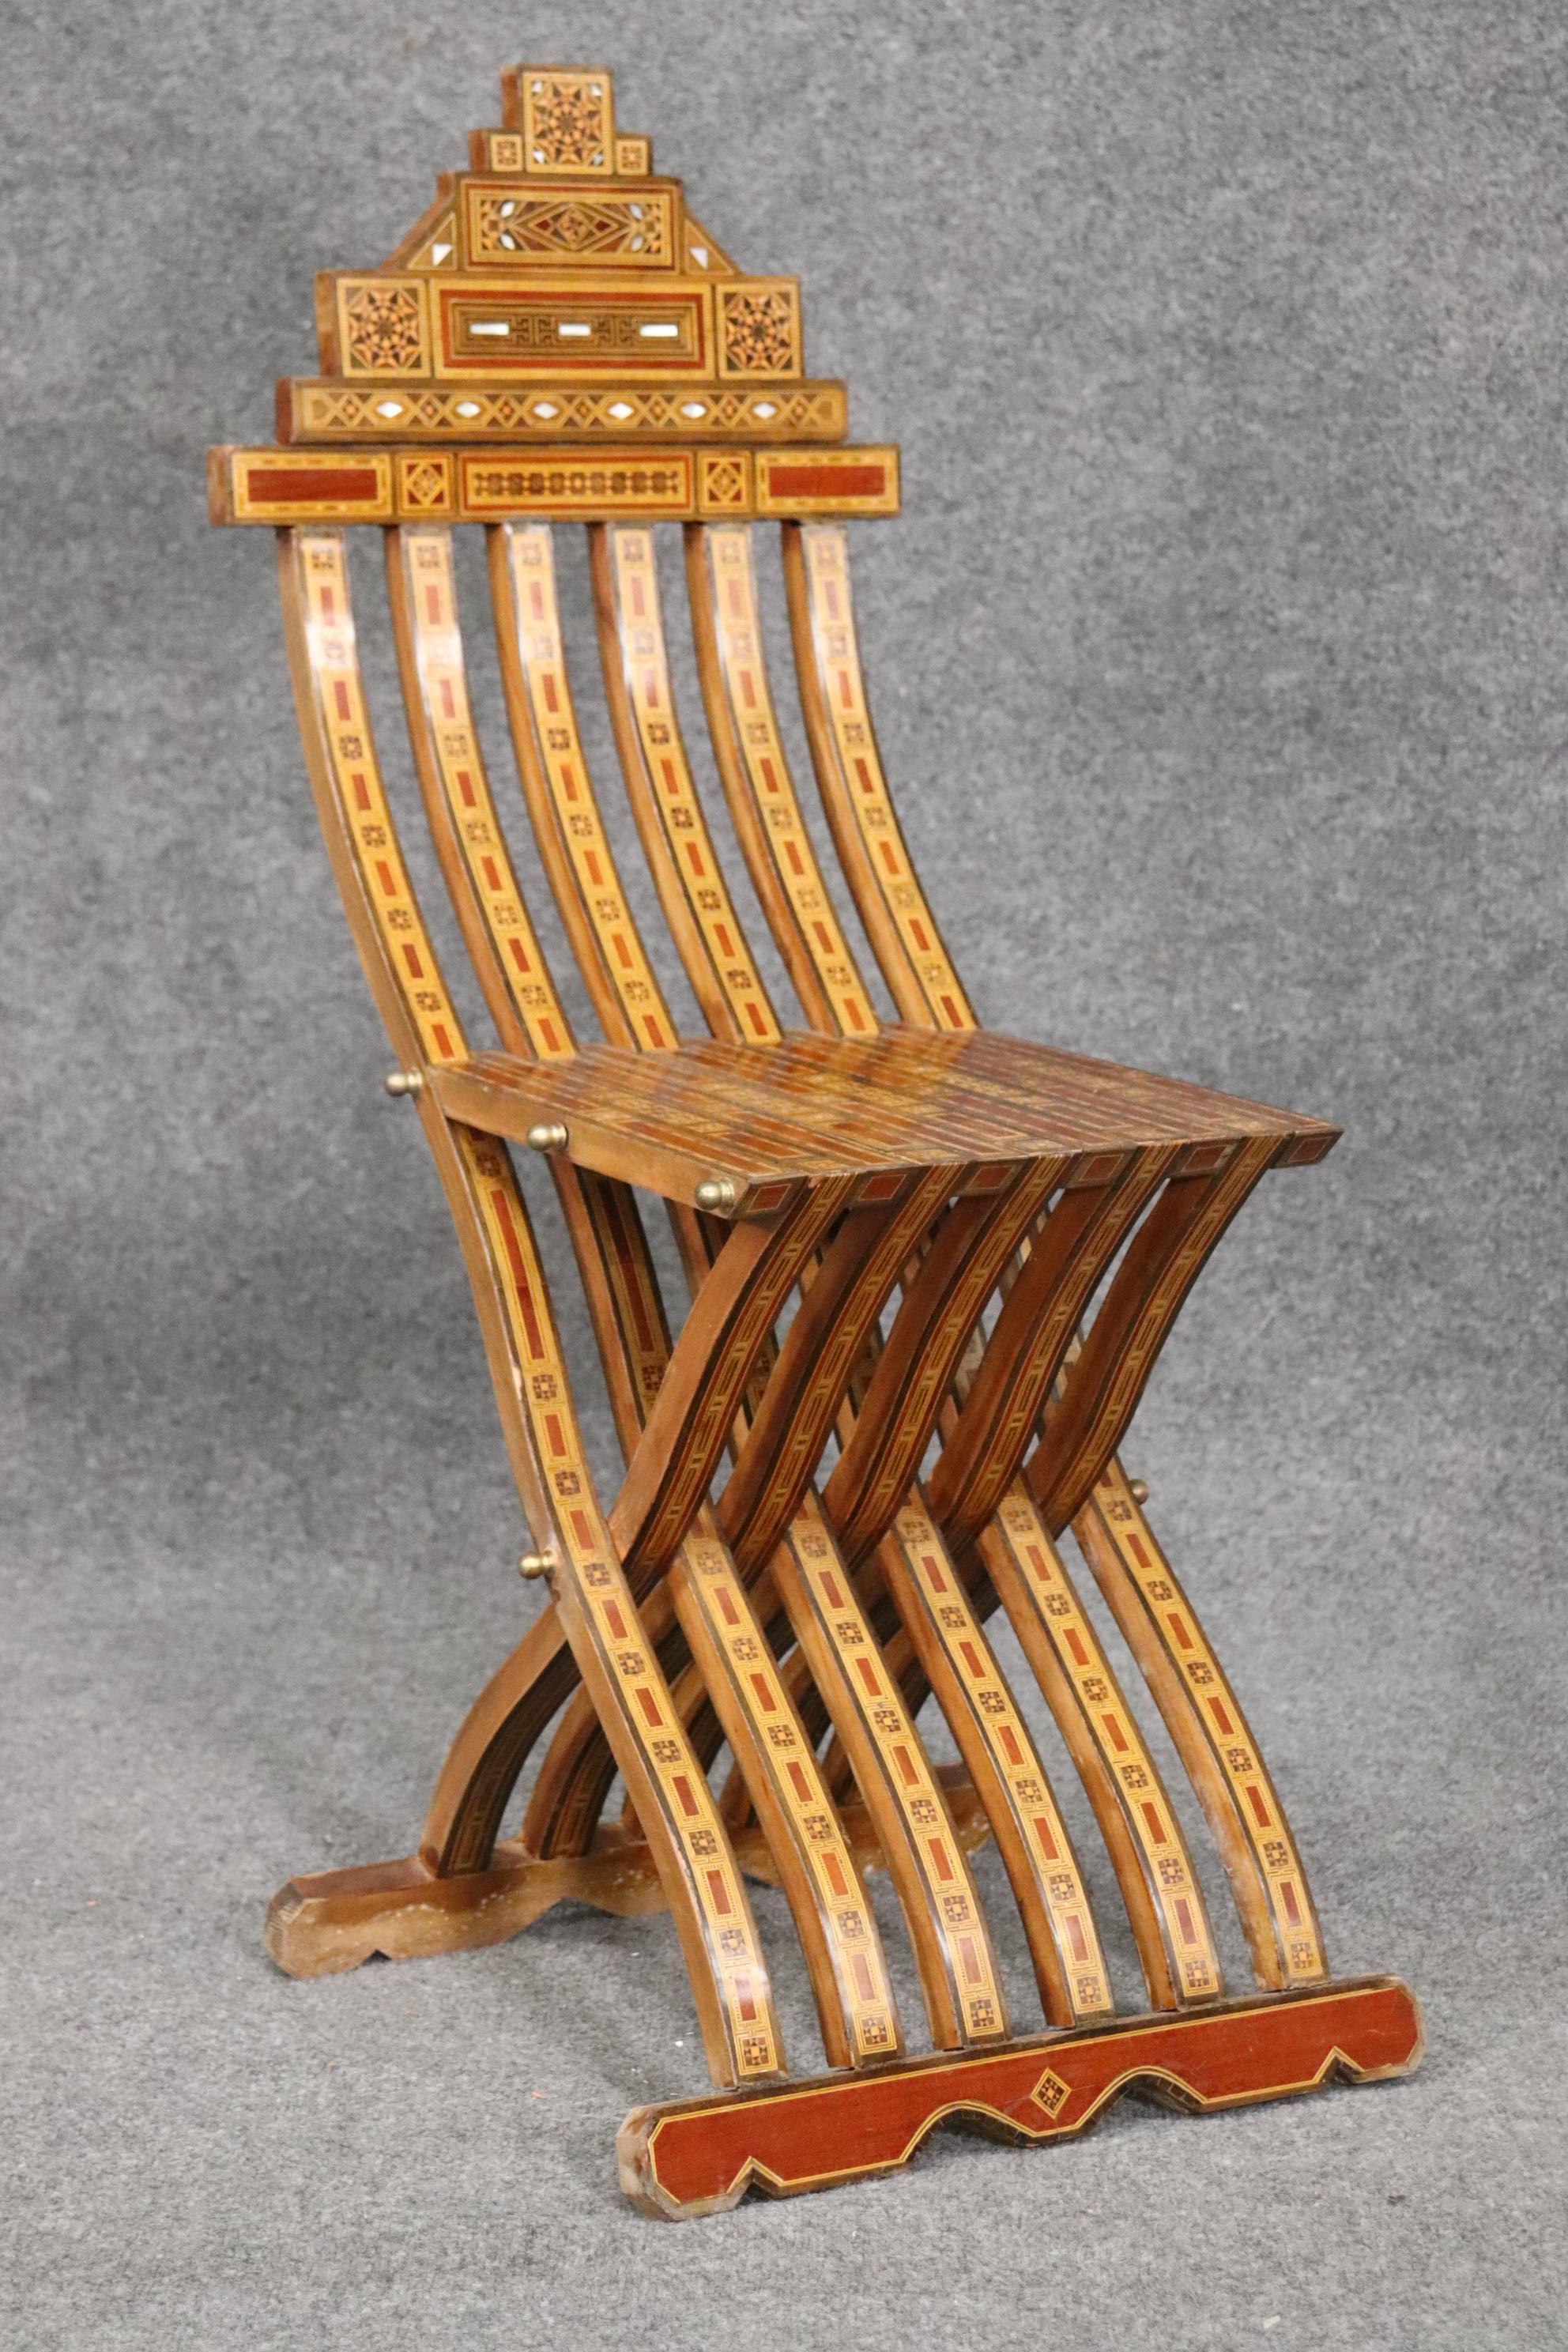 This is a fantastic Syrian inlaid folding chair. The chair is in very good condition and works fine. The chair measures 38 tall x 17 wide x 21 deep x seat height is 18 inches.